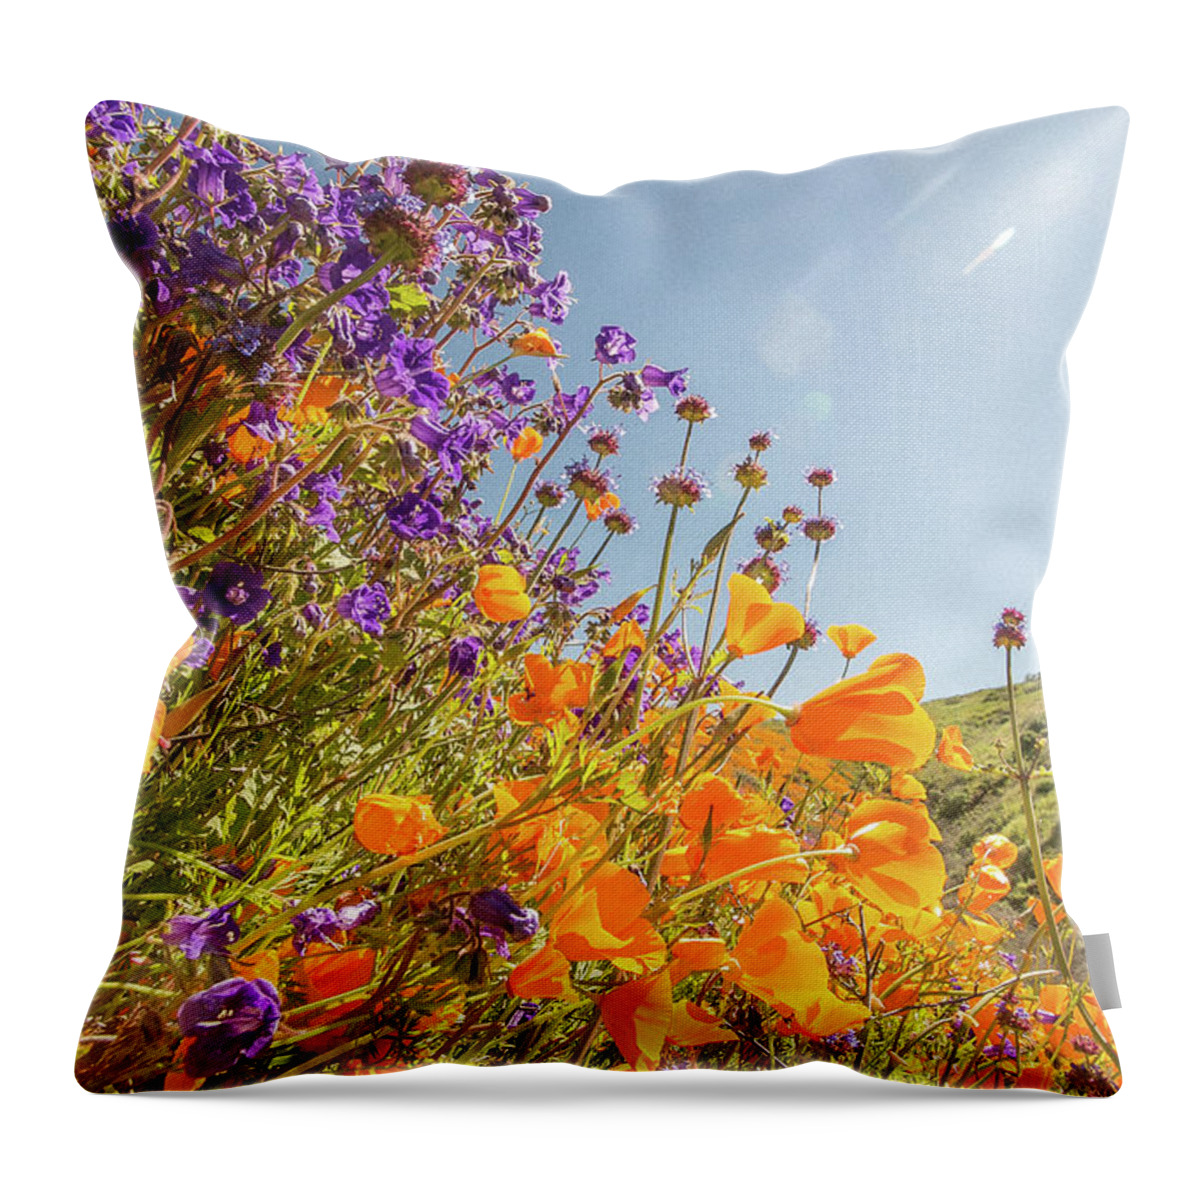 Flowers Throw Pillow featuring the photograph Flora 10 by Ryan Weddle